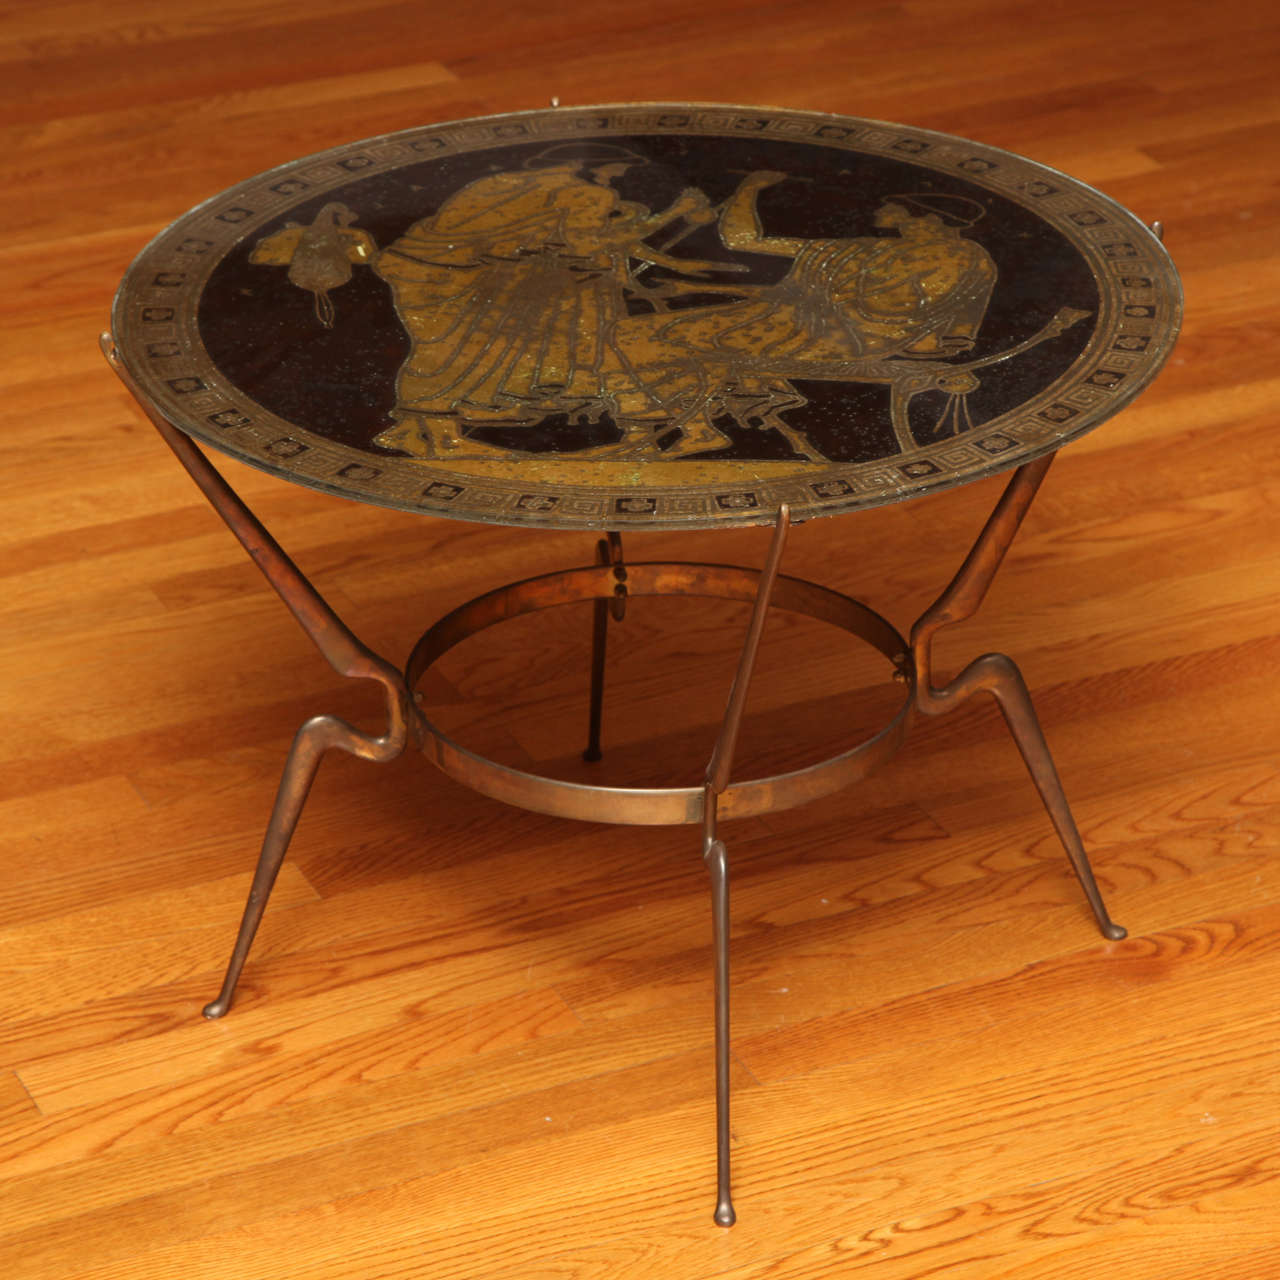 The round verge églomisé top depicting two classical figures in gold on a Coco-Cola brown ground; set onto a gilt metal base with four legs joined by a round stretcher.